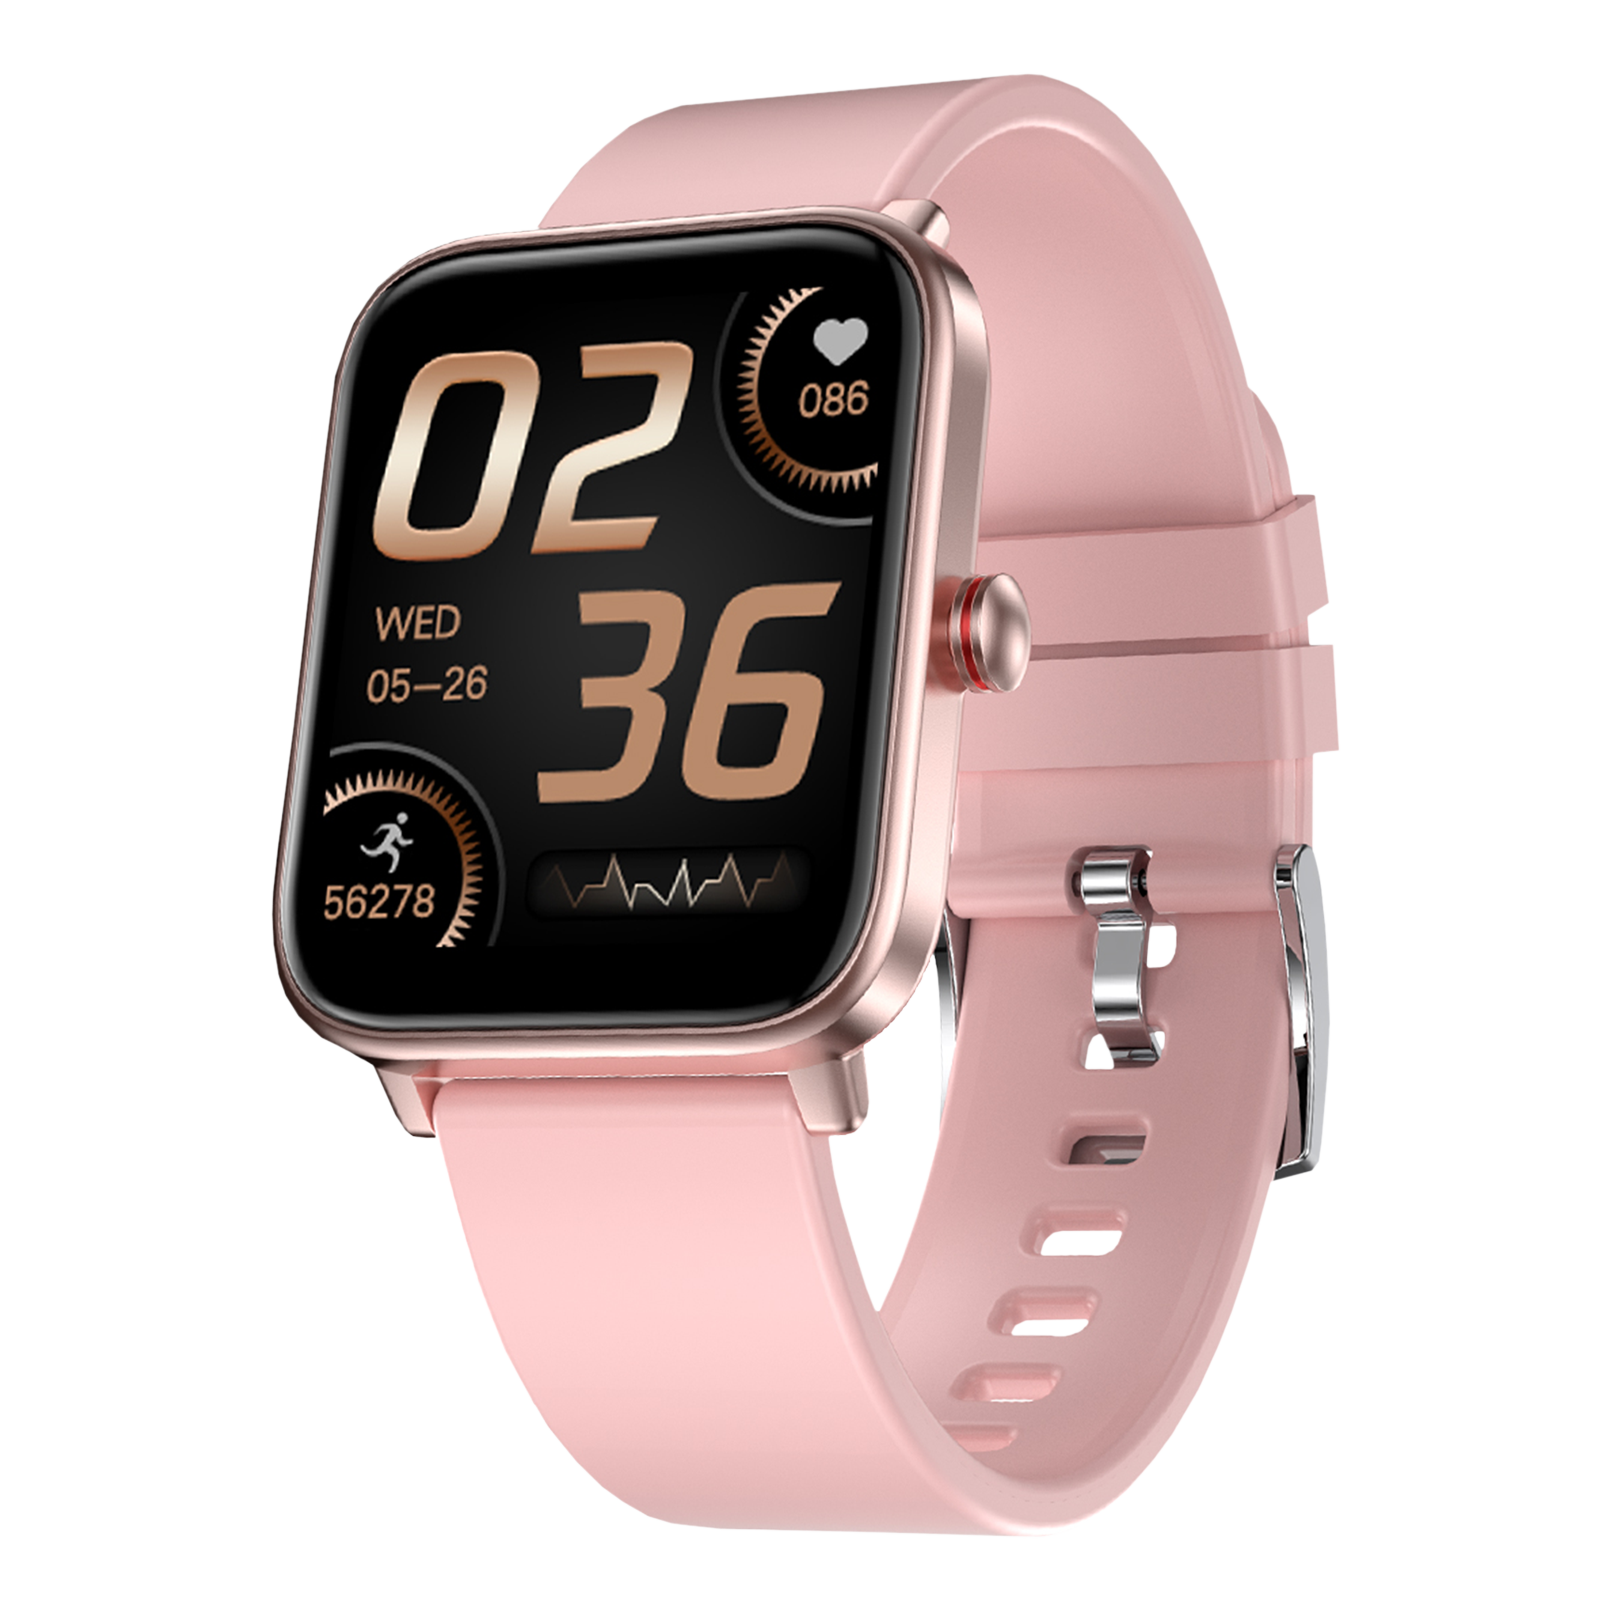 Fire-Boltt Ninja Pro Max BSW026 Smartwatch with Camera & Music Control (40mm LCD Display, IP68 Water Resistant, Pink Gold Strap)_1